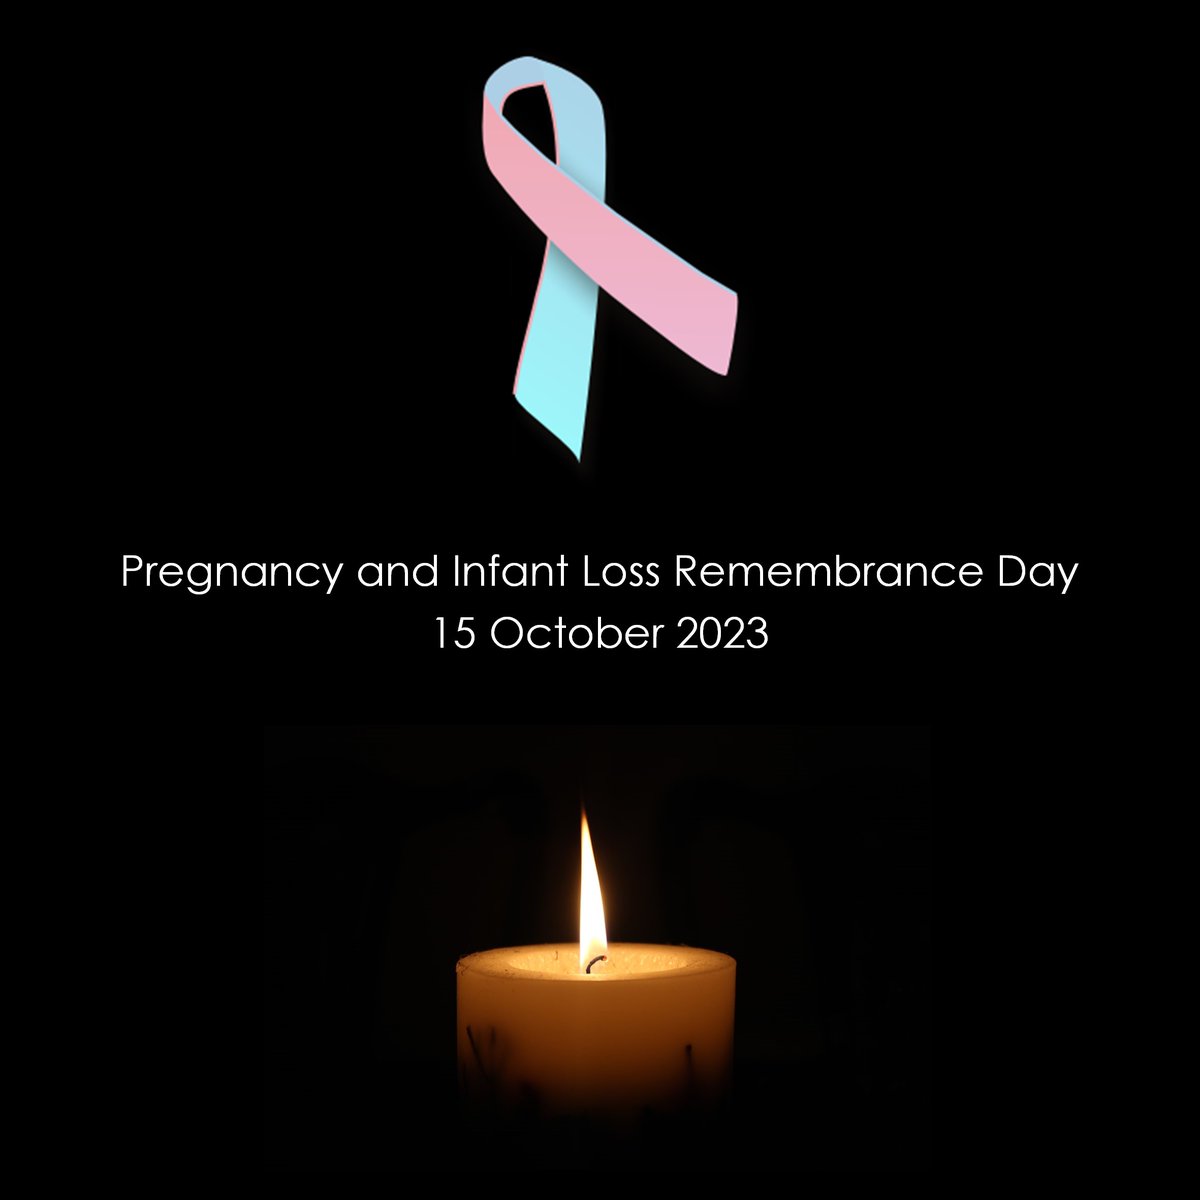 Today is Pregnancy and Infant Loss Remembrance Day. I pay tribute to all the babies lost to pregnancy loss and infant death and acknowledge the profound grief of their families. @SandsAustralia @CREStillbirth @StillbirthAUS @PAILAustralia